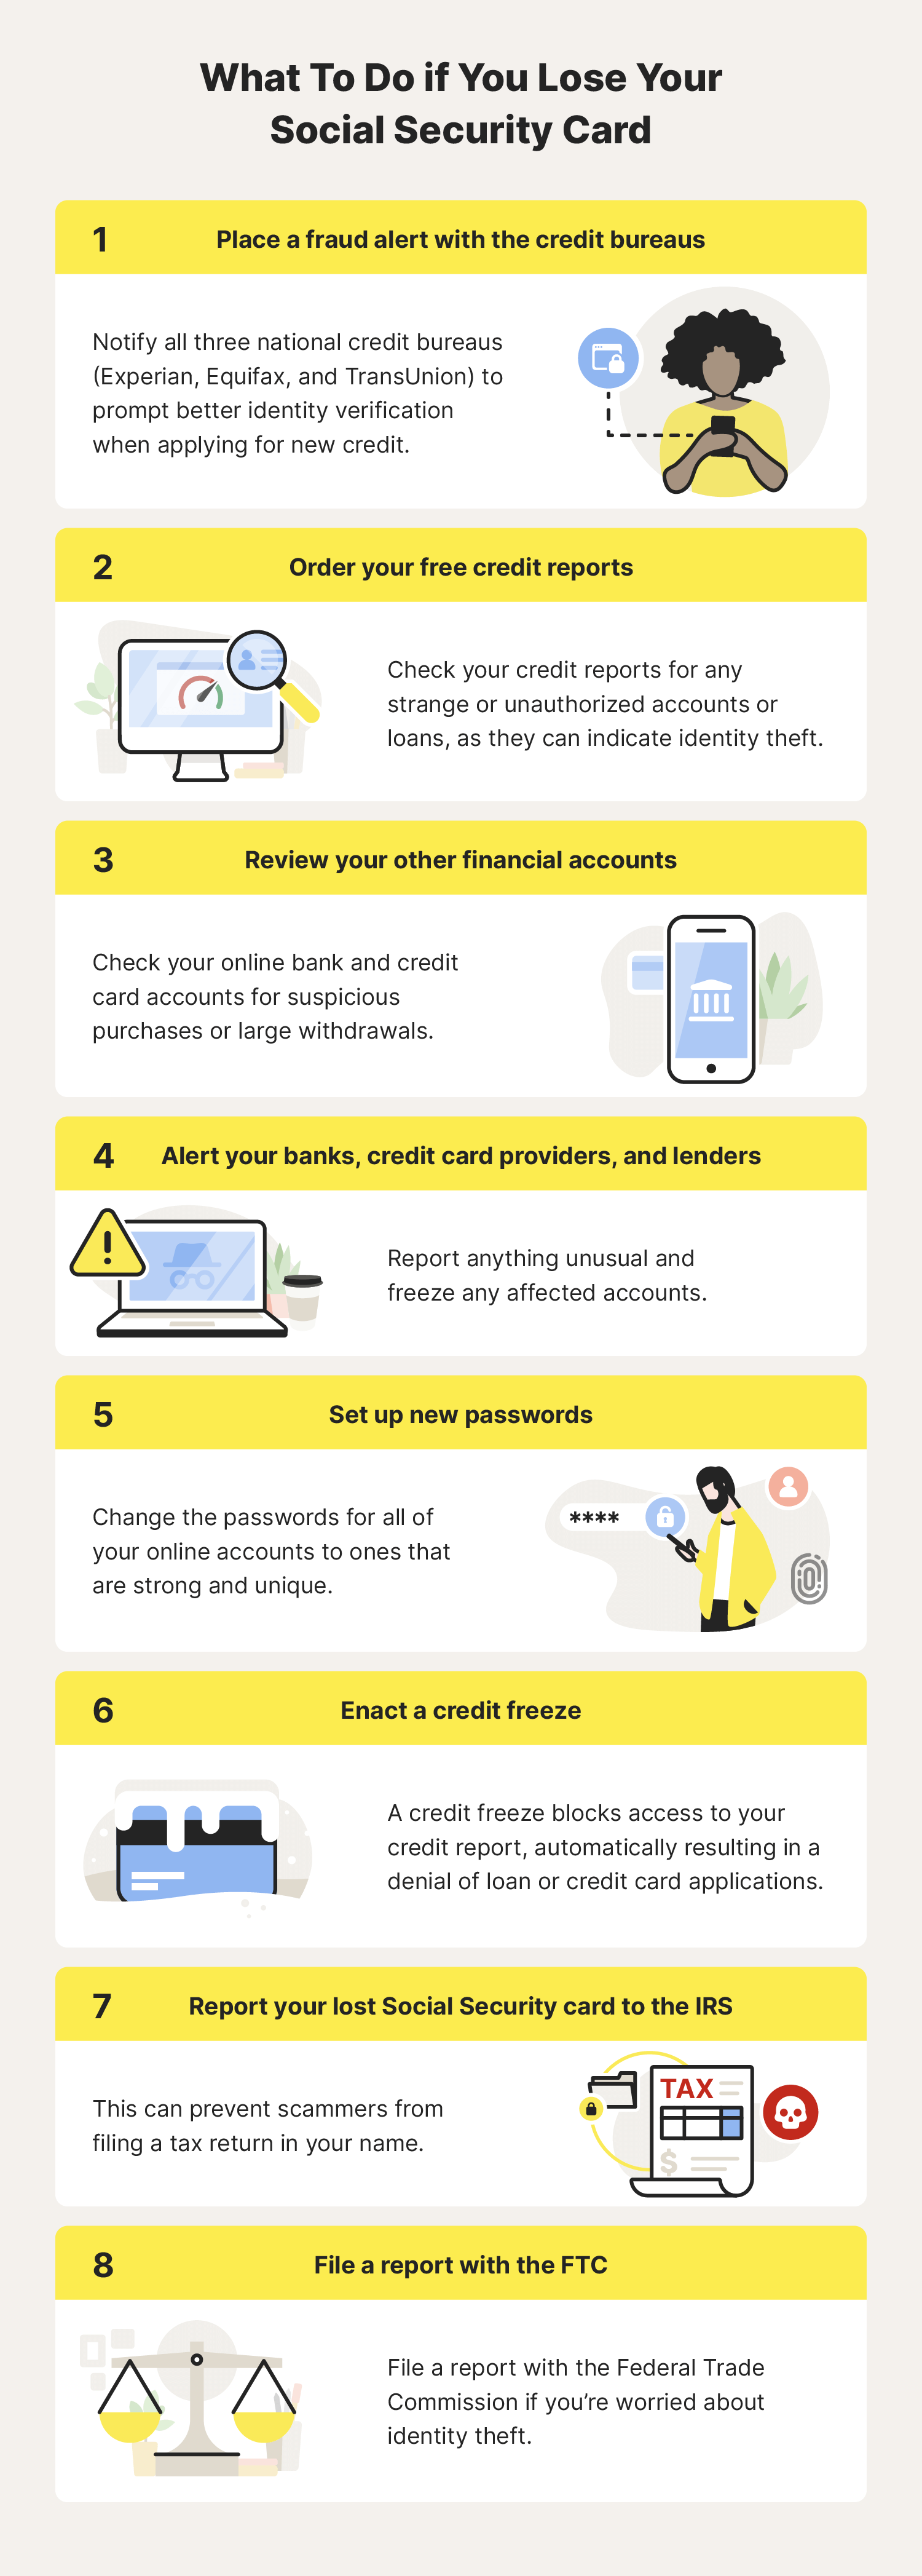 An infographic covering what to do if you lose your Social Security card.